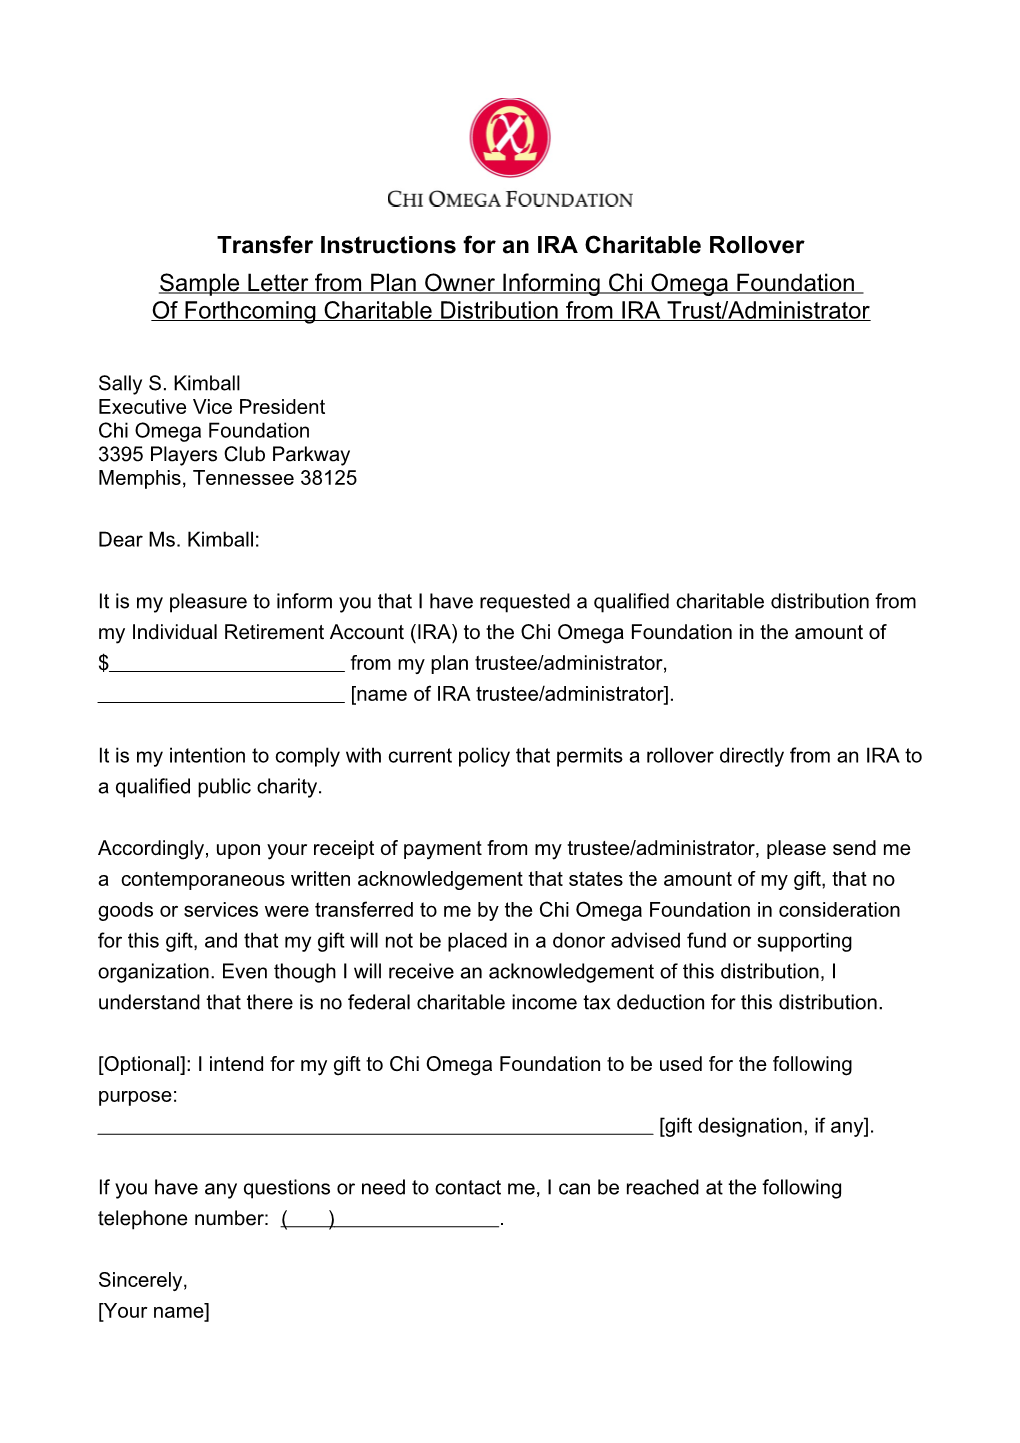 Transfer Instructions for an IRA Charitable Rollover